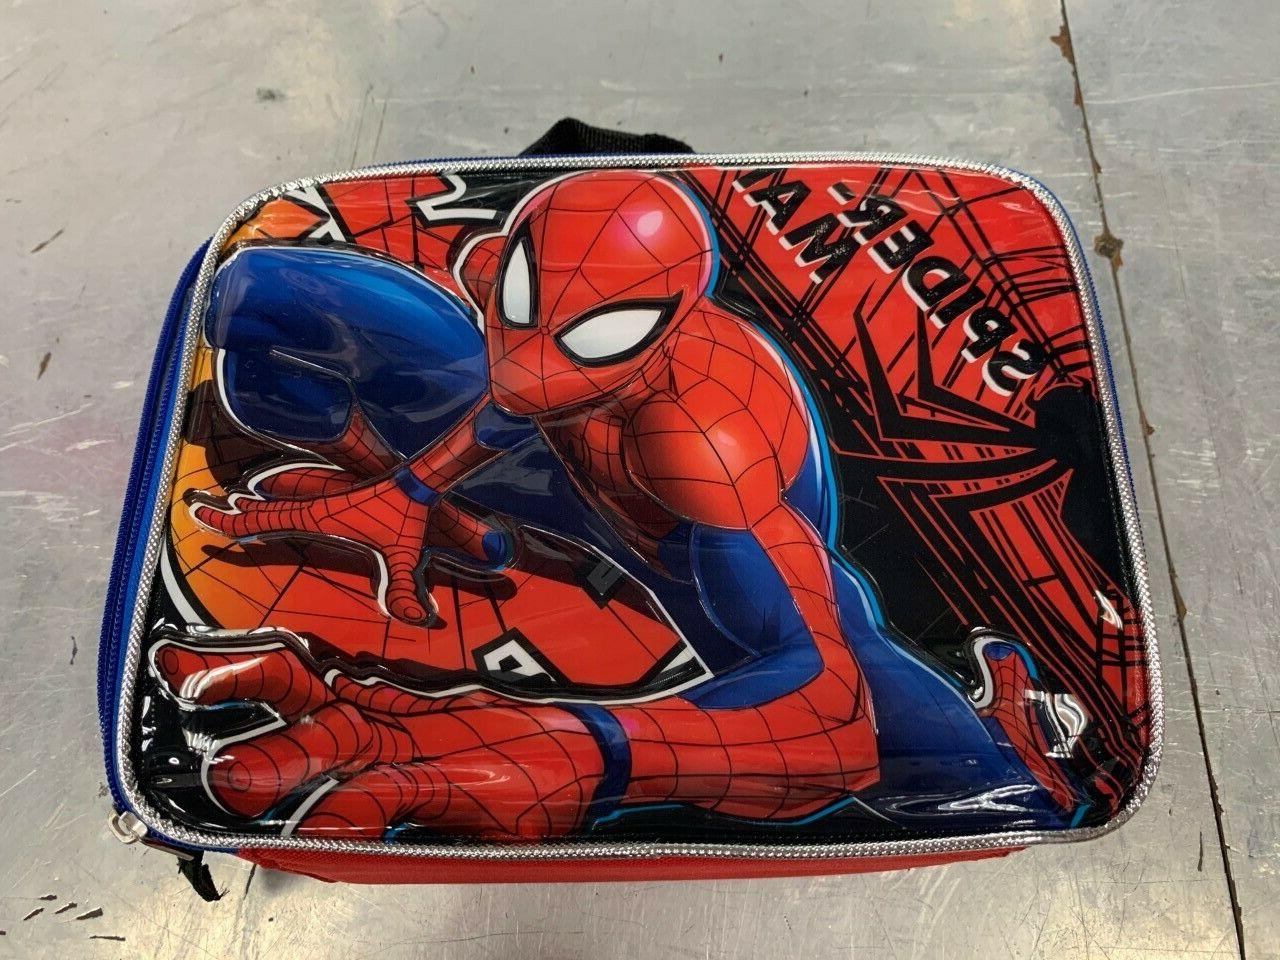 THERMOS Licensed Soft Lunch Kit, Spider-Man